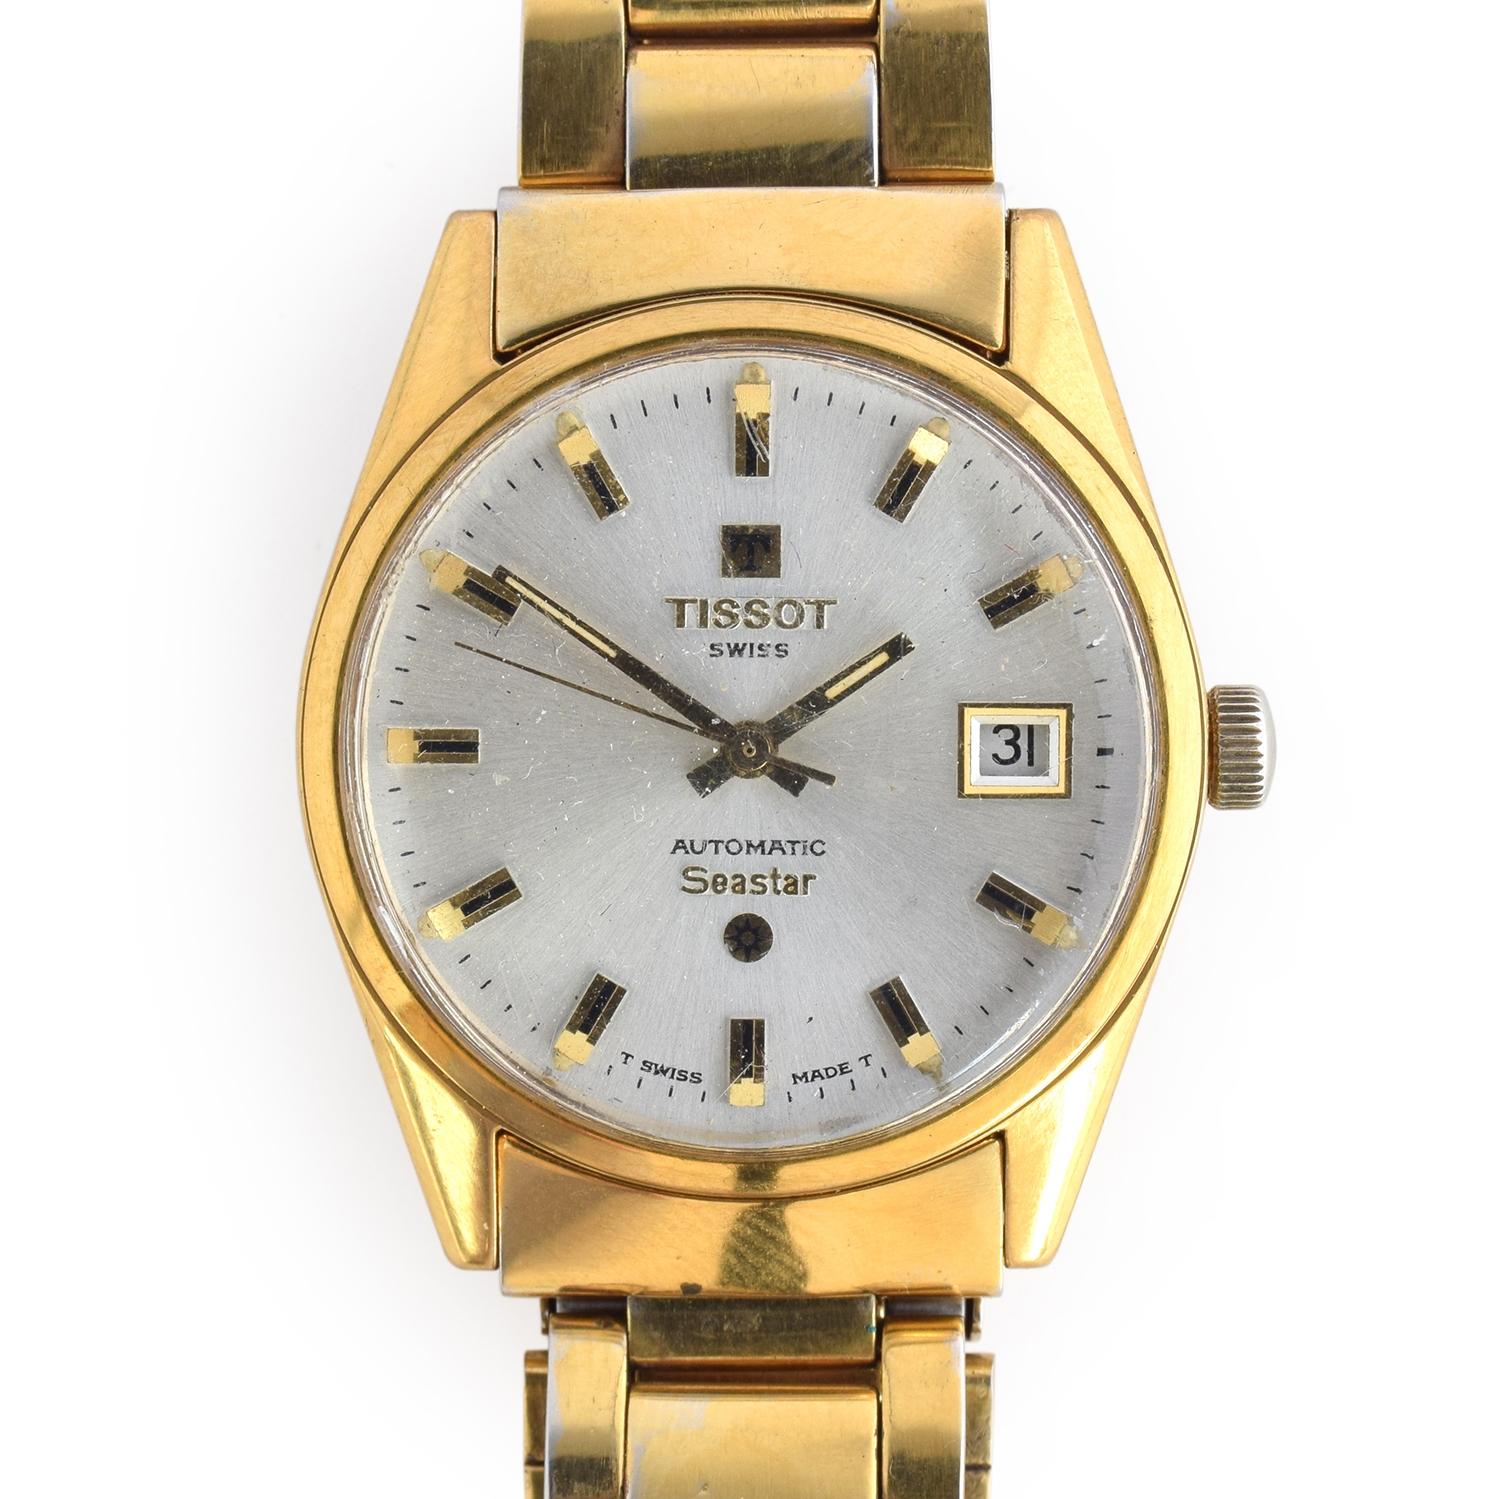 A TISSOT SEASTAR AUTOMATIC GENTLEMAN'S GOLD PLATED WRIST WATCH WITH DATE Circa 1960s, ref. 44543-1X,